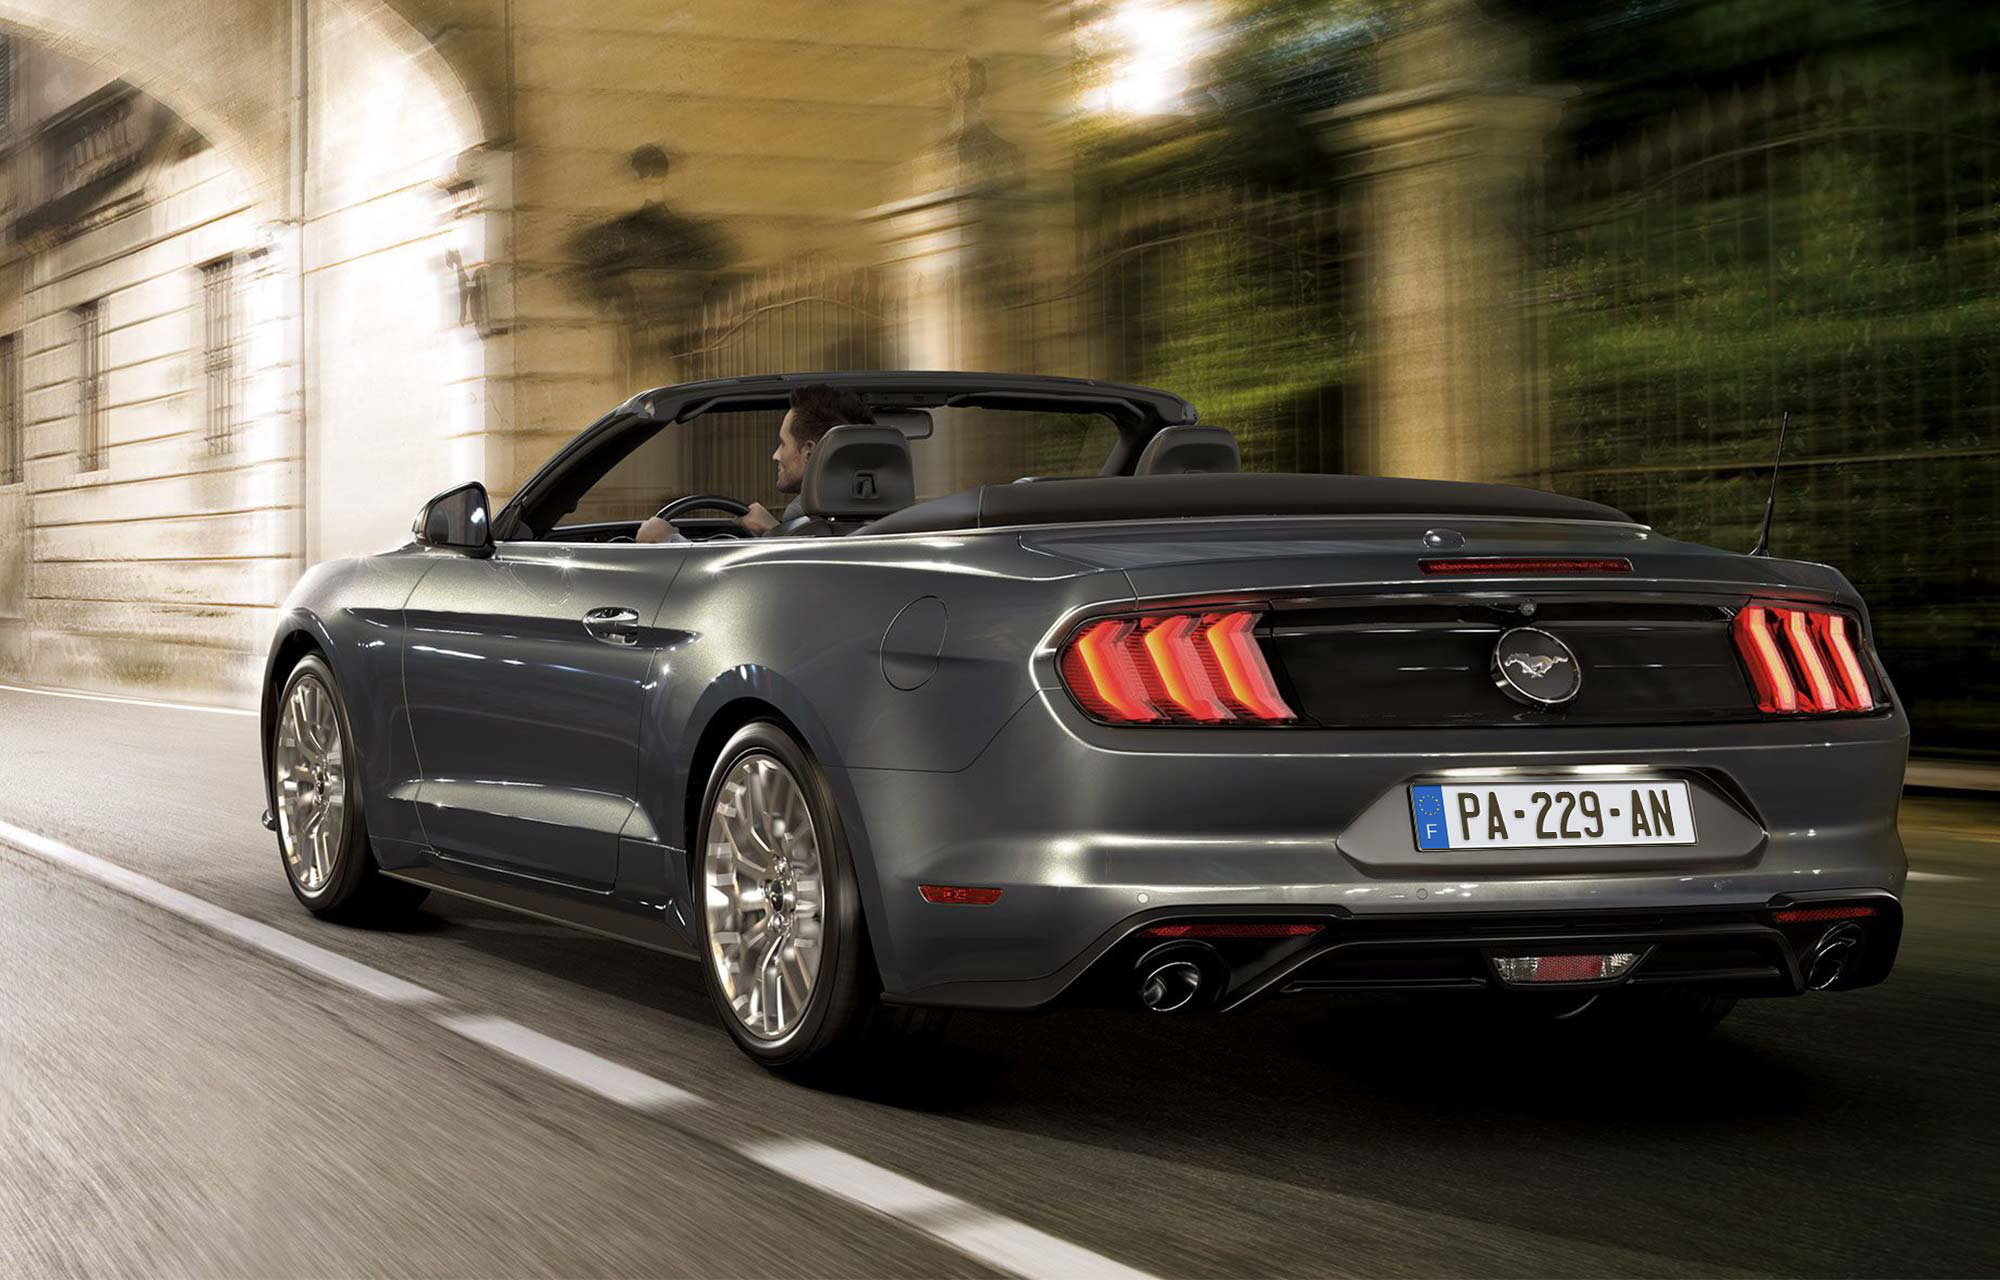 Mustang history, Iconic Ford, Cultural impact, Automotive milestone, Performance innovation, 2000x1280 HD Desktop